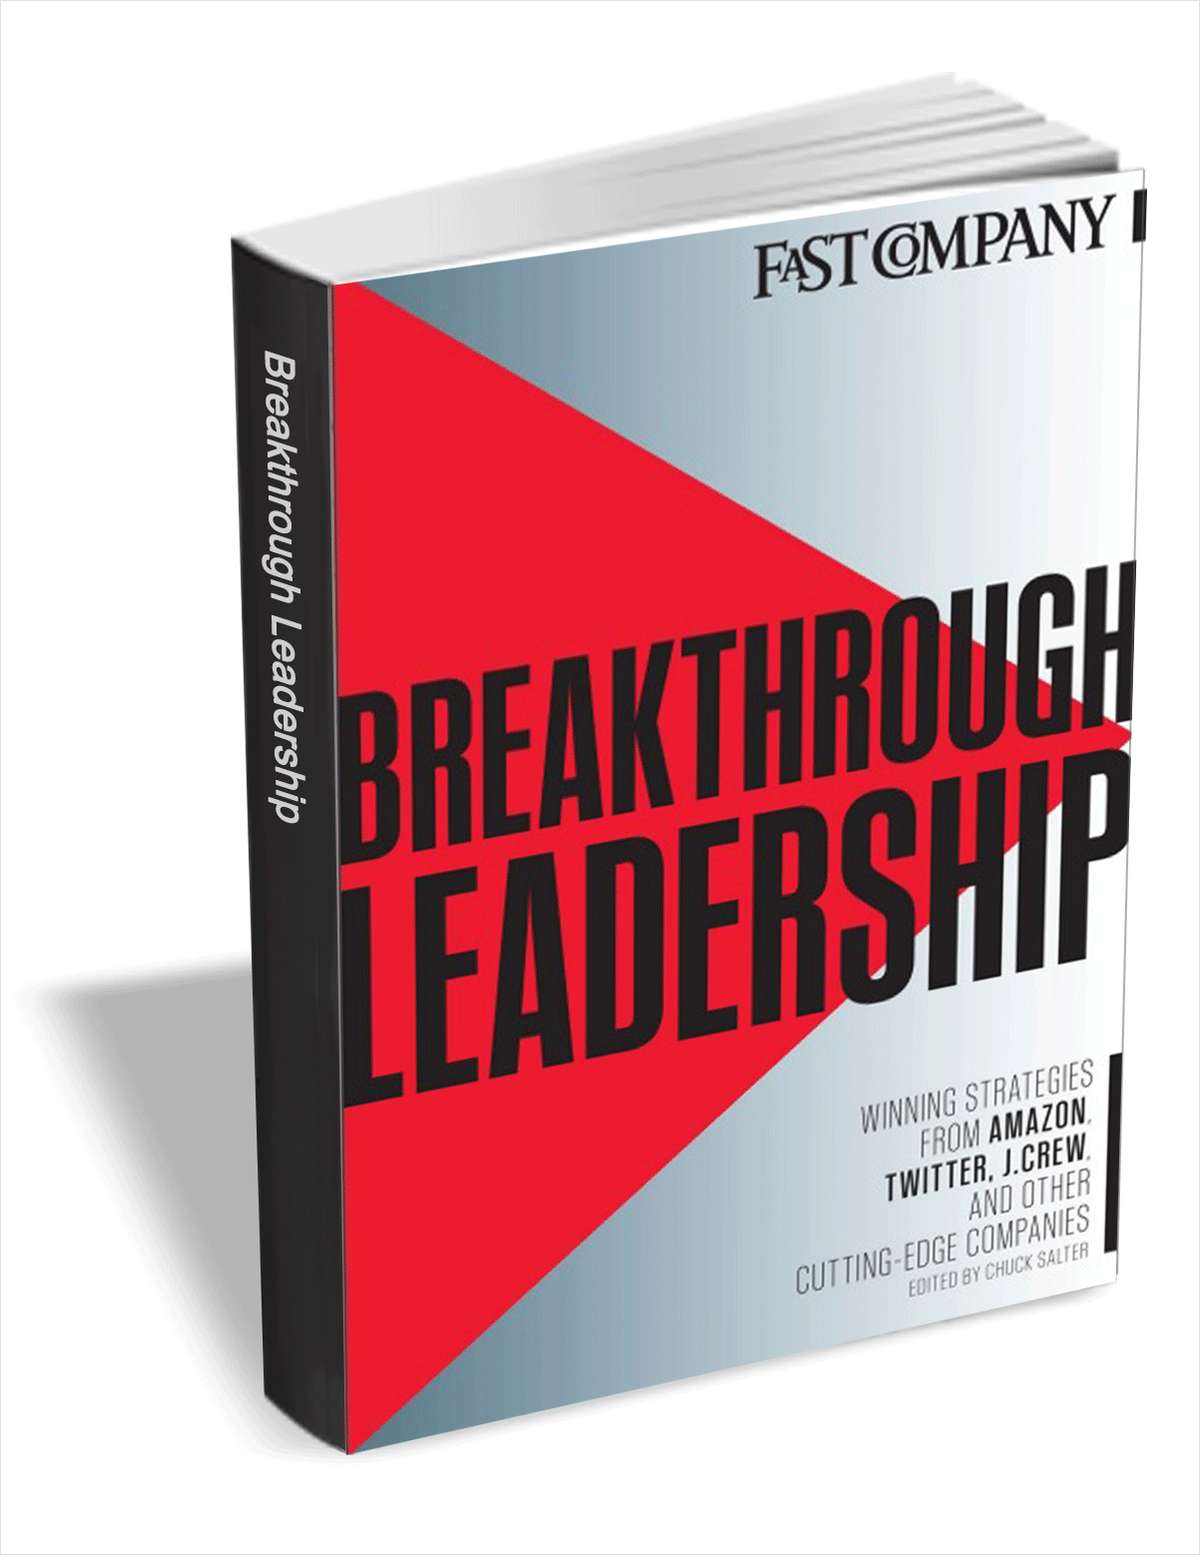 Breakthrough Leadership - Winning Strategies from Amazon, Twitter, J.Crew, and Other Cutting-edge Companies